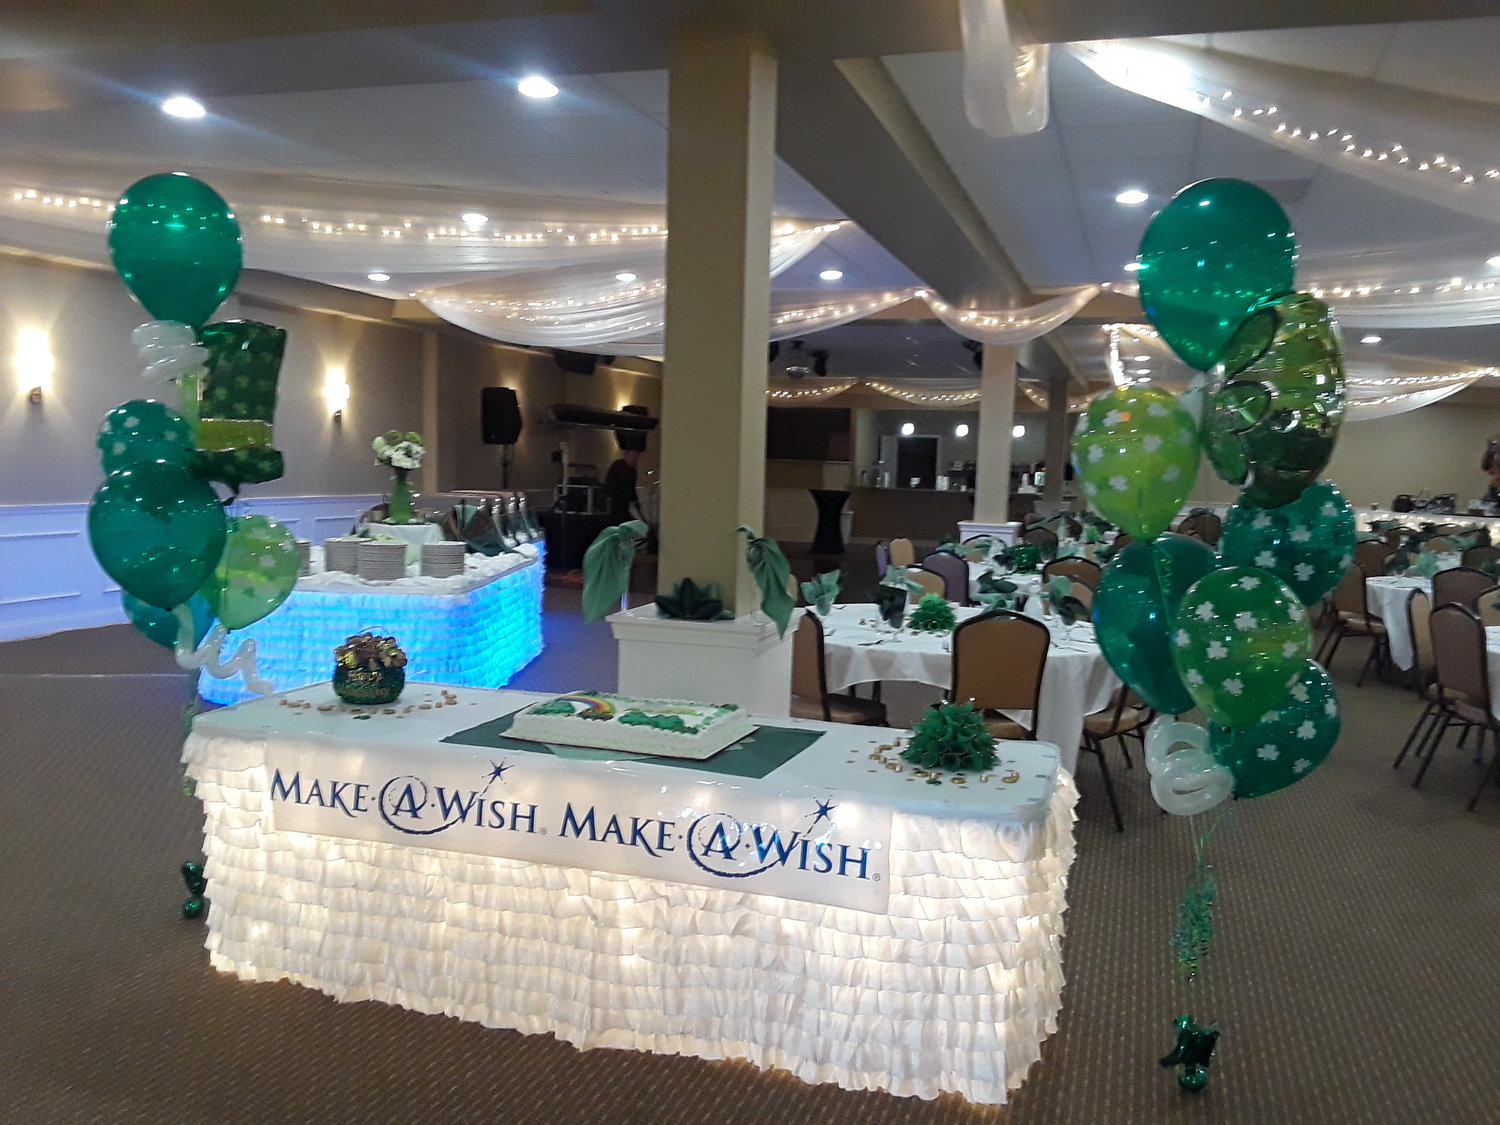 Make A Wish Foundation event at Banquets of Minnesota